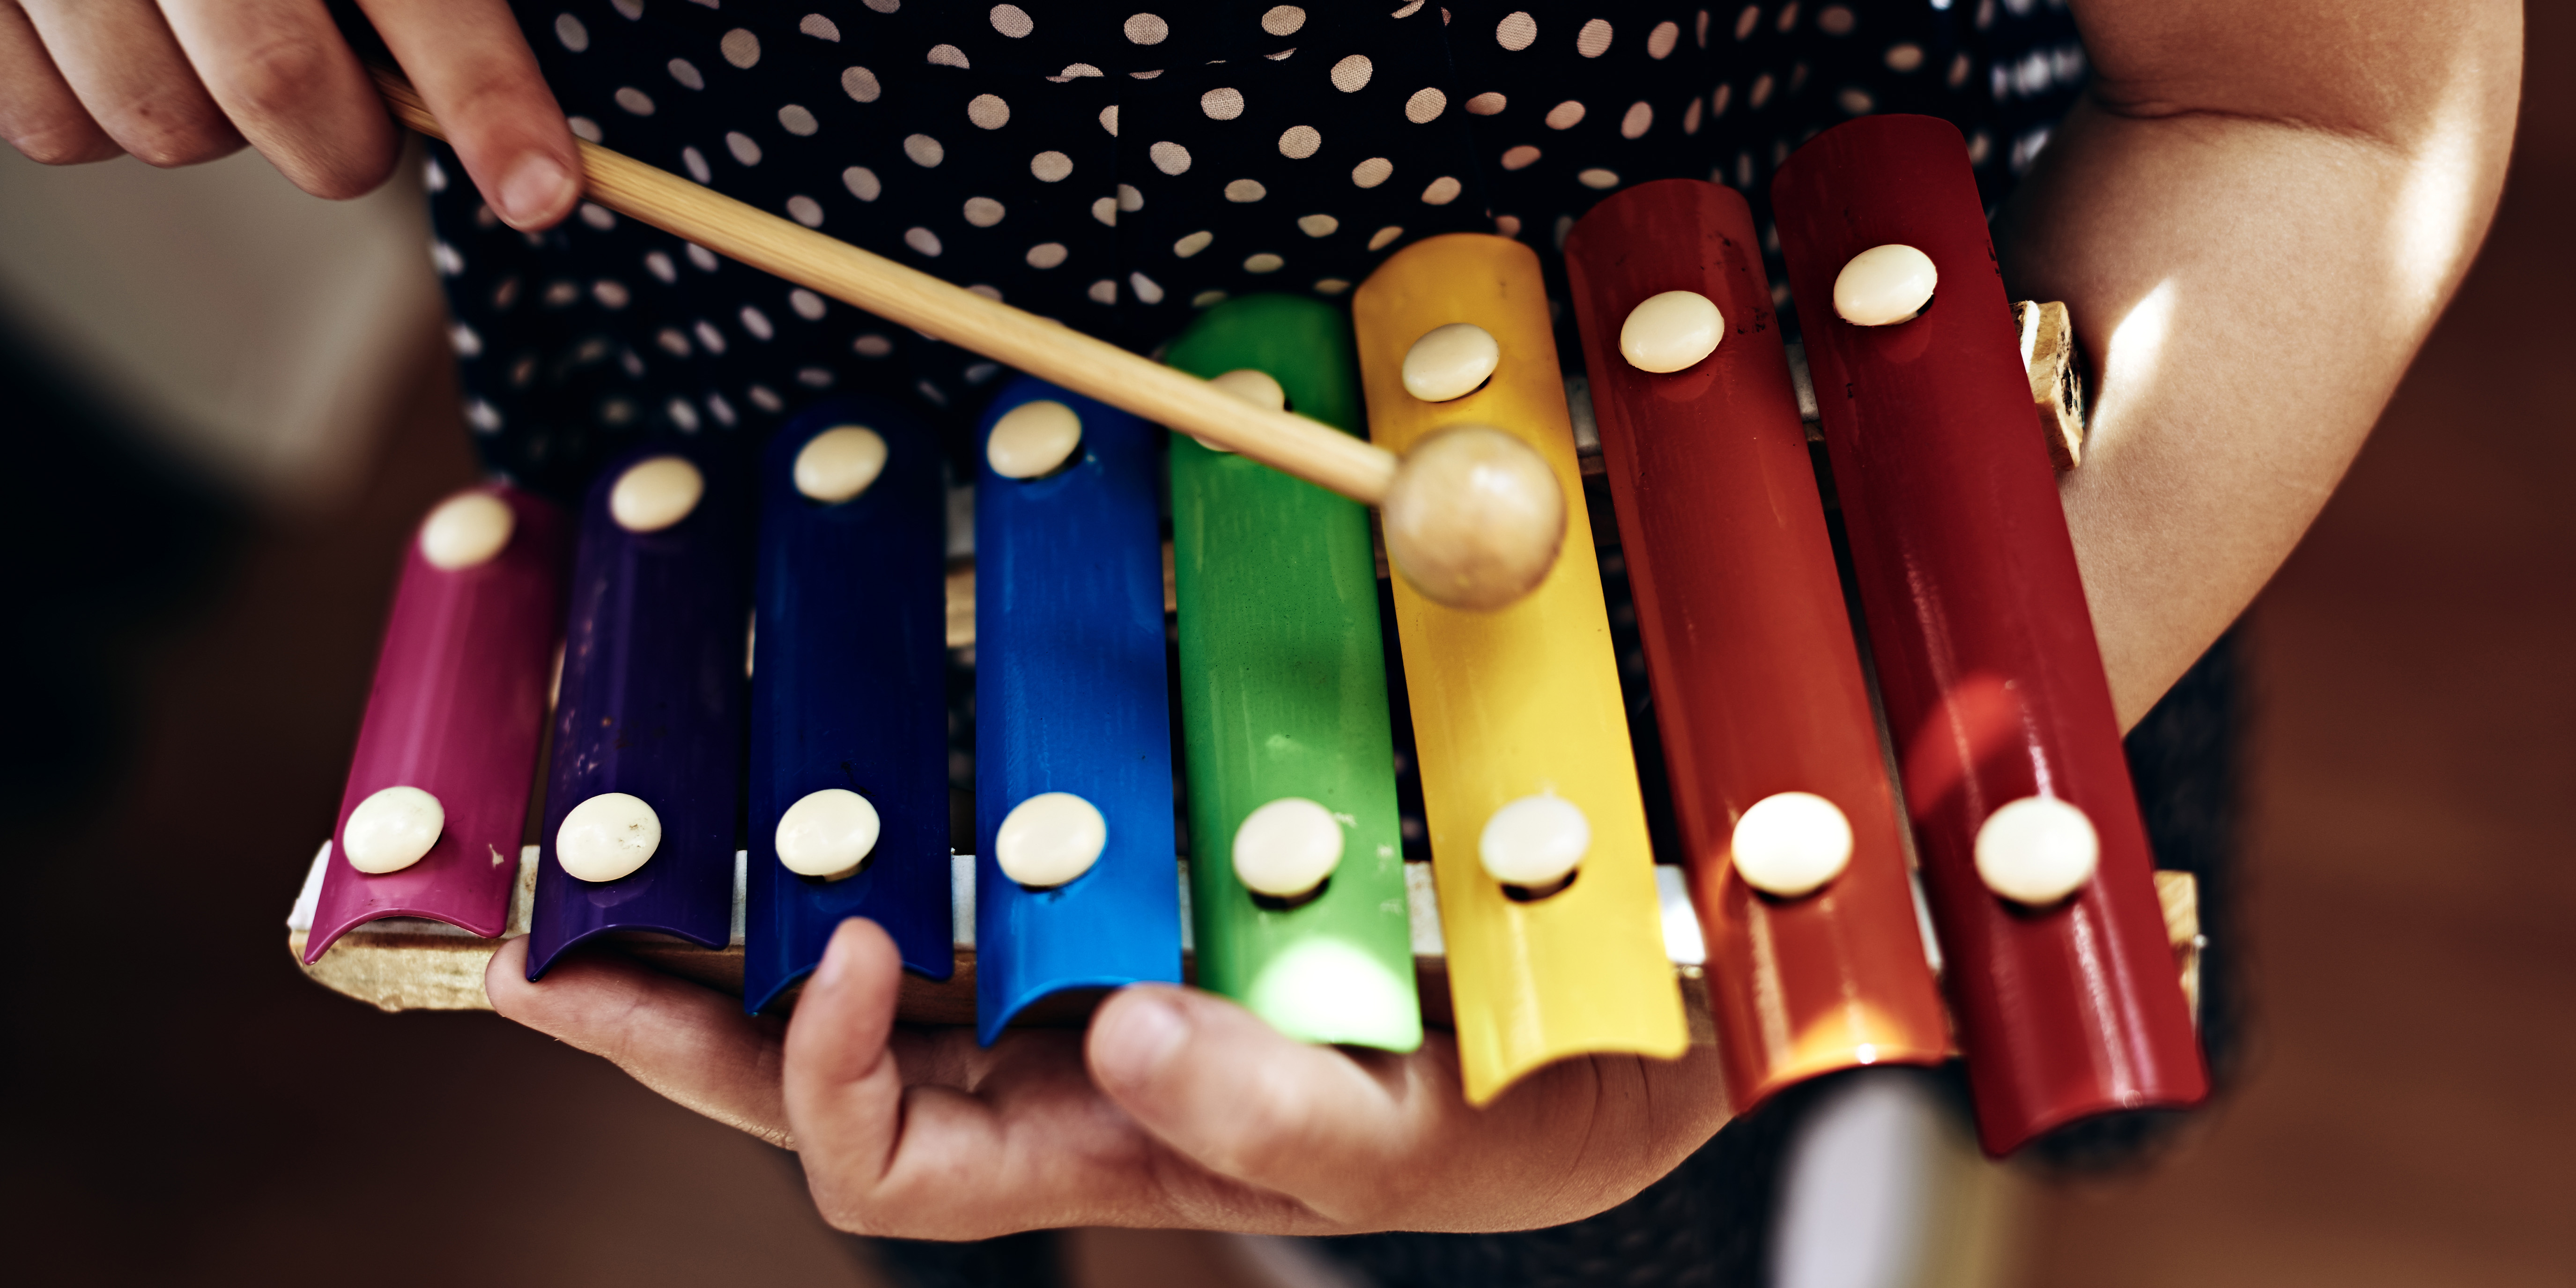 WEB-KID-PLAYING-XYLOPHONE-COLOR-Stasique I Shutterstock